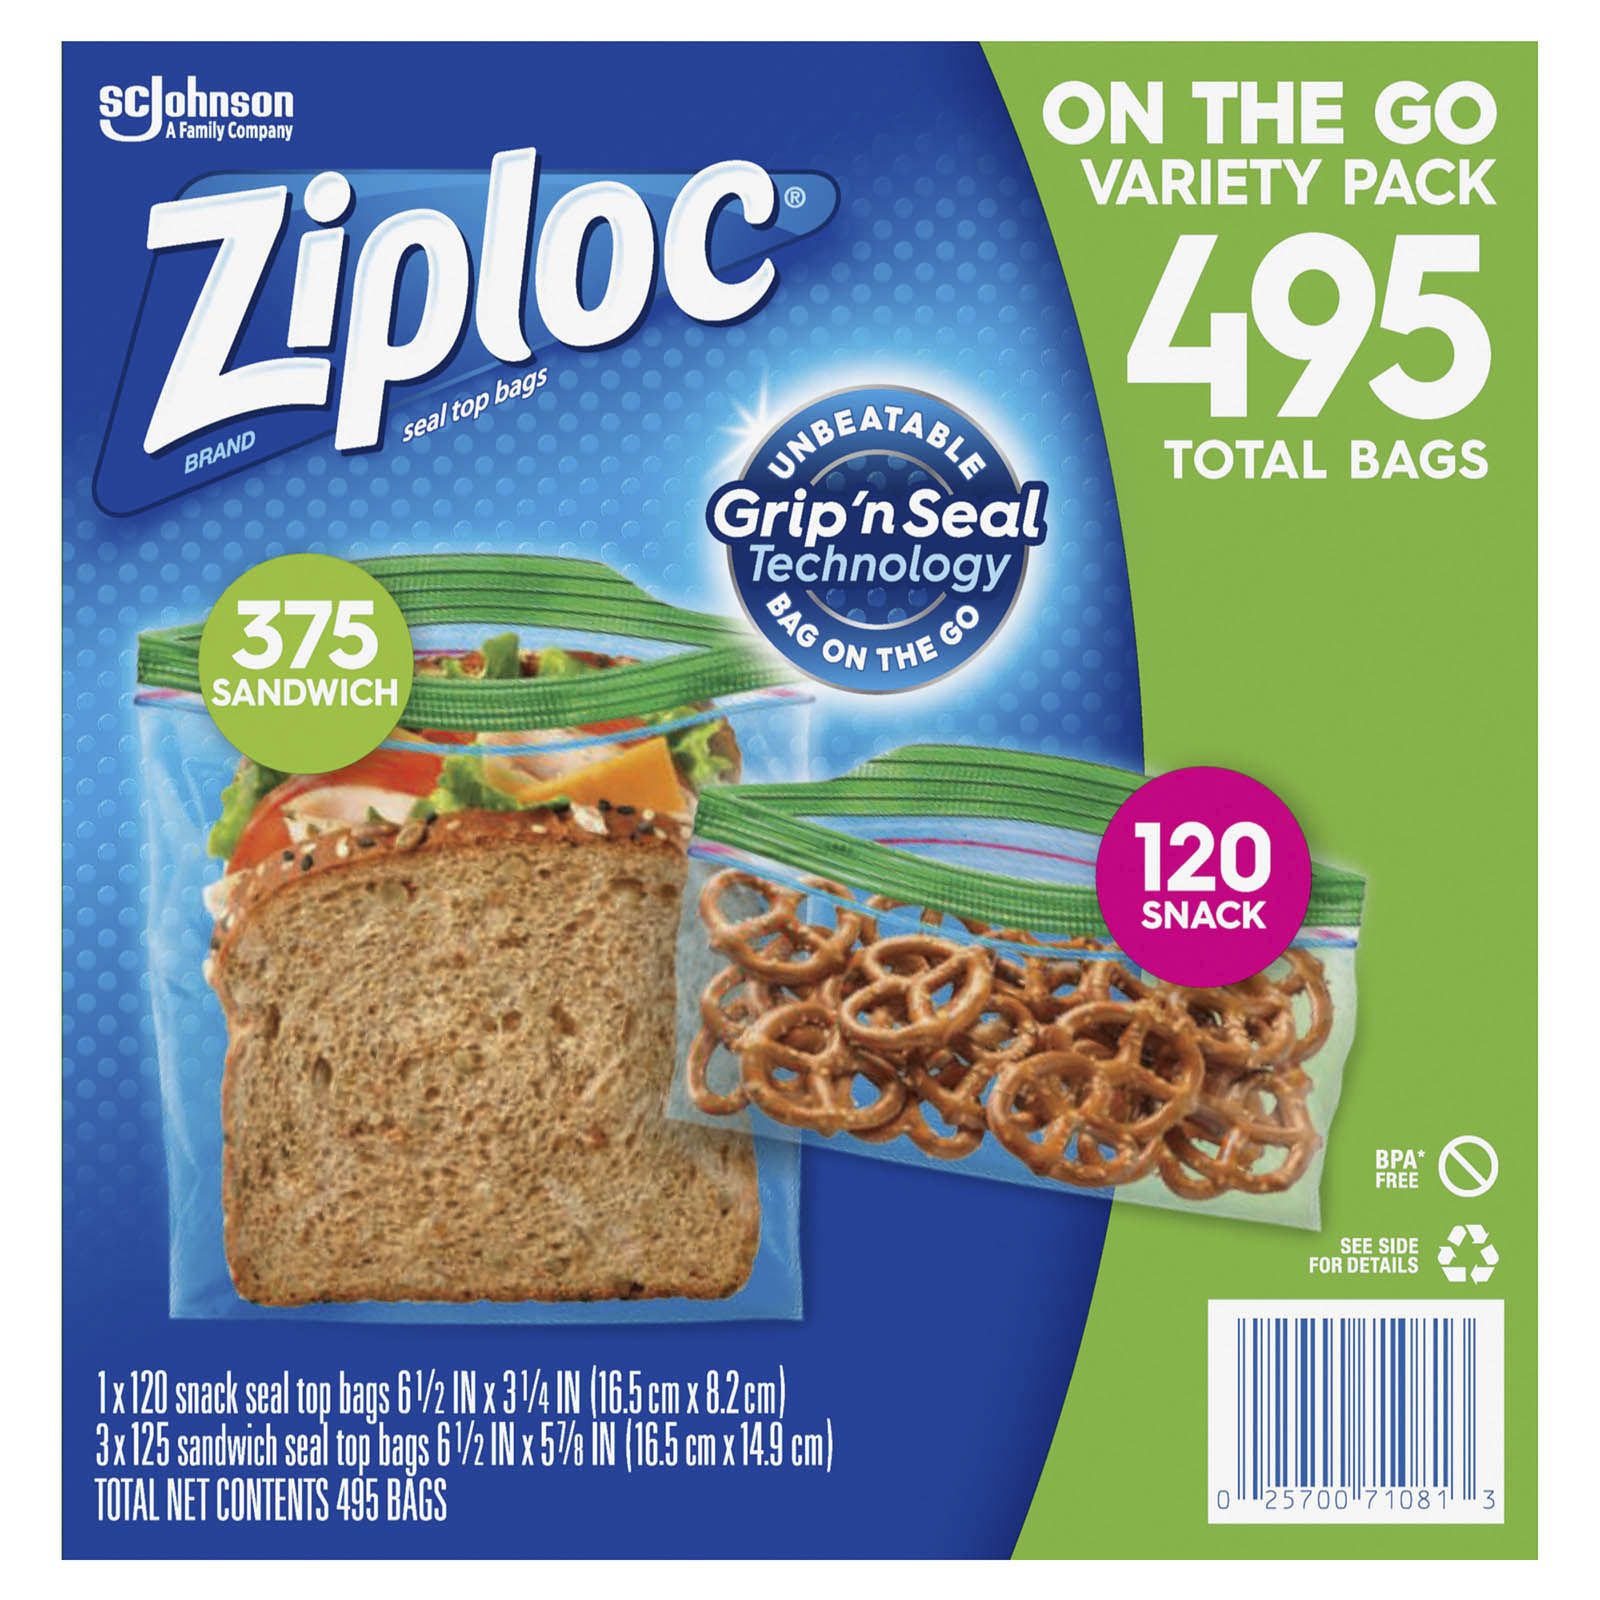 Ziploc Quart Storage Bags with Grip 'n Seal Technology - 216 ct